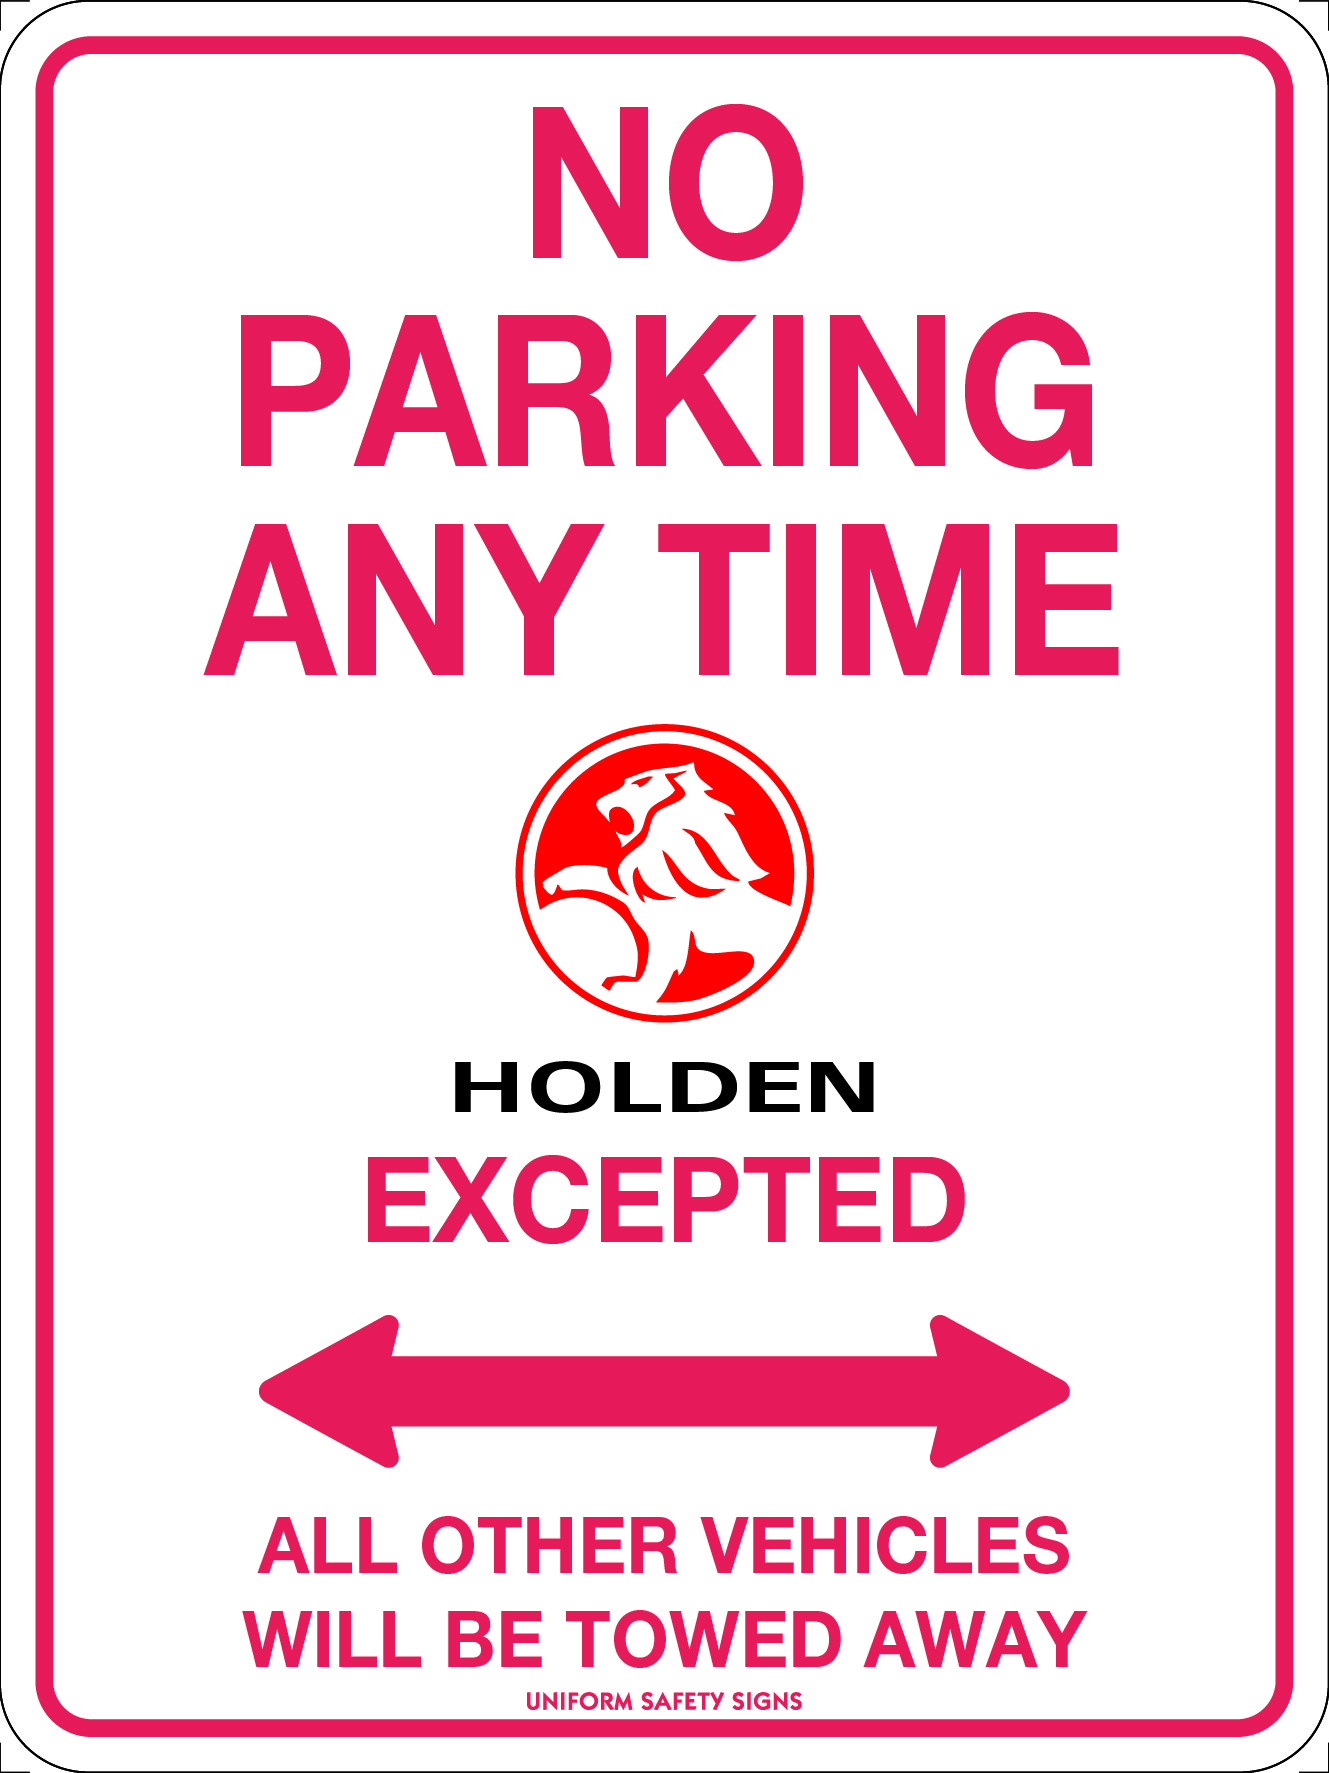 SIGN 300 X 225MM METAL NO PARKING ANYTIME HOLDEN EXCEPTED